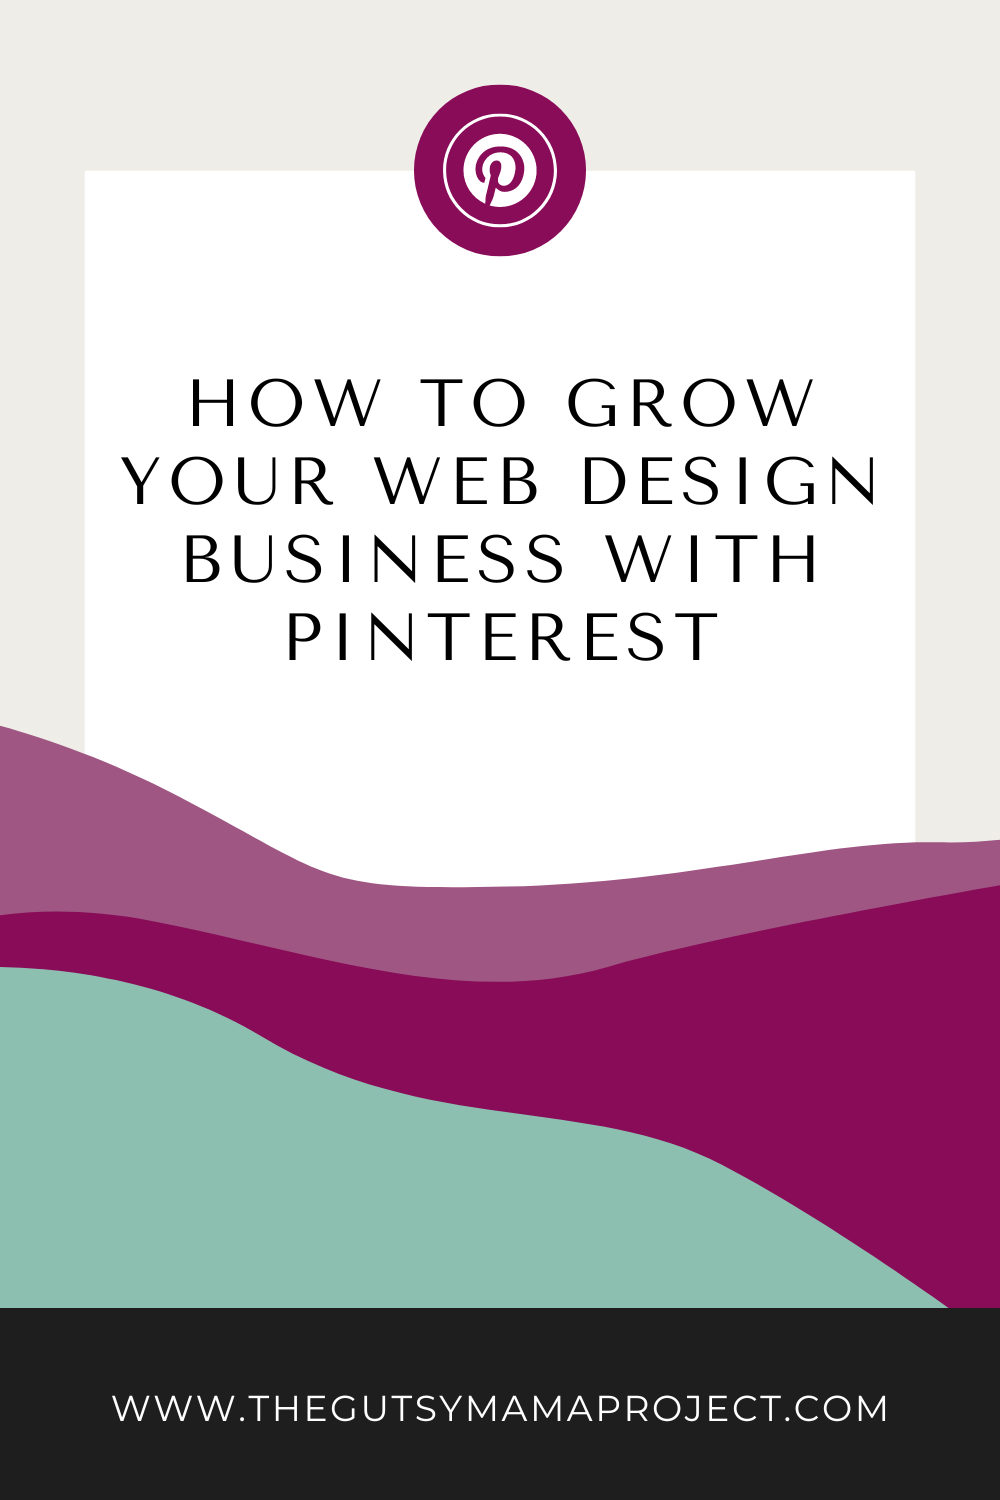 How to Grow Your Web Design Business with Pinterest - thegutsymamaproject.com.png